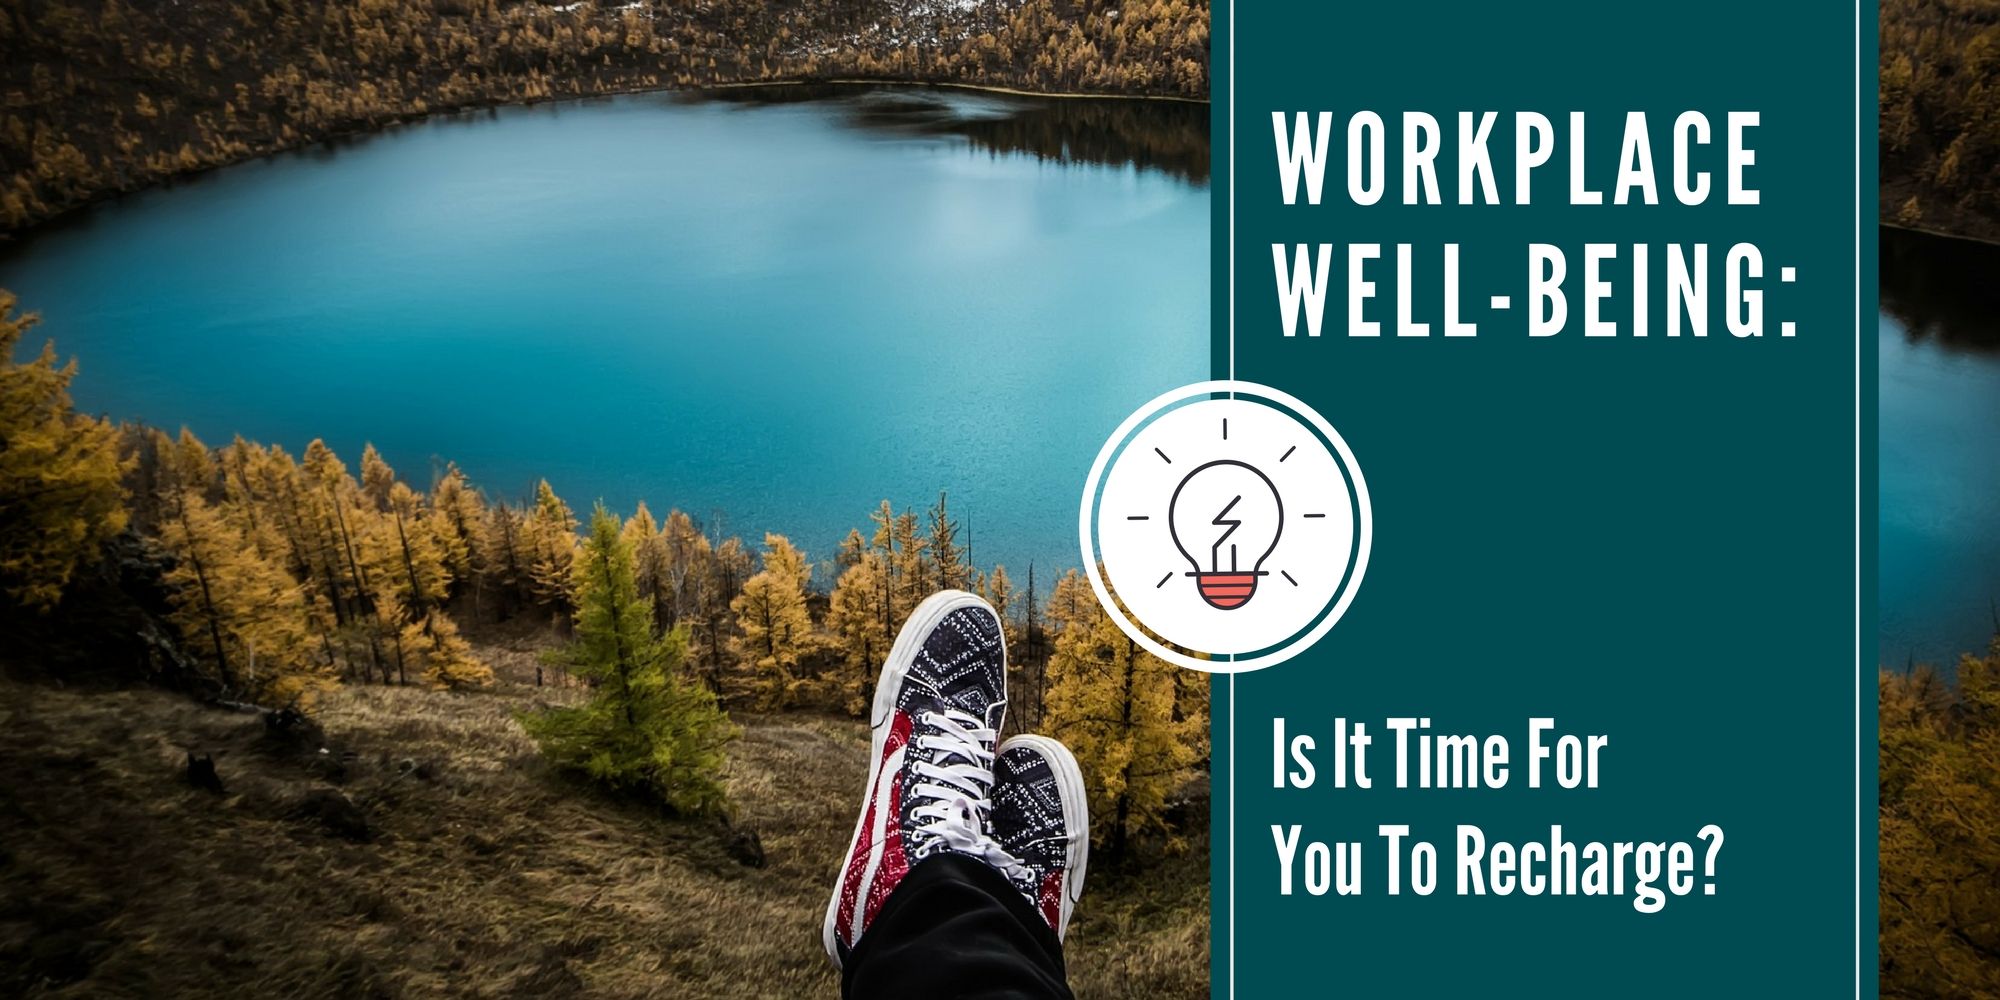 Work Place Wellbeing Apr 2018